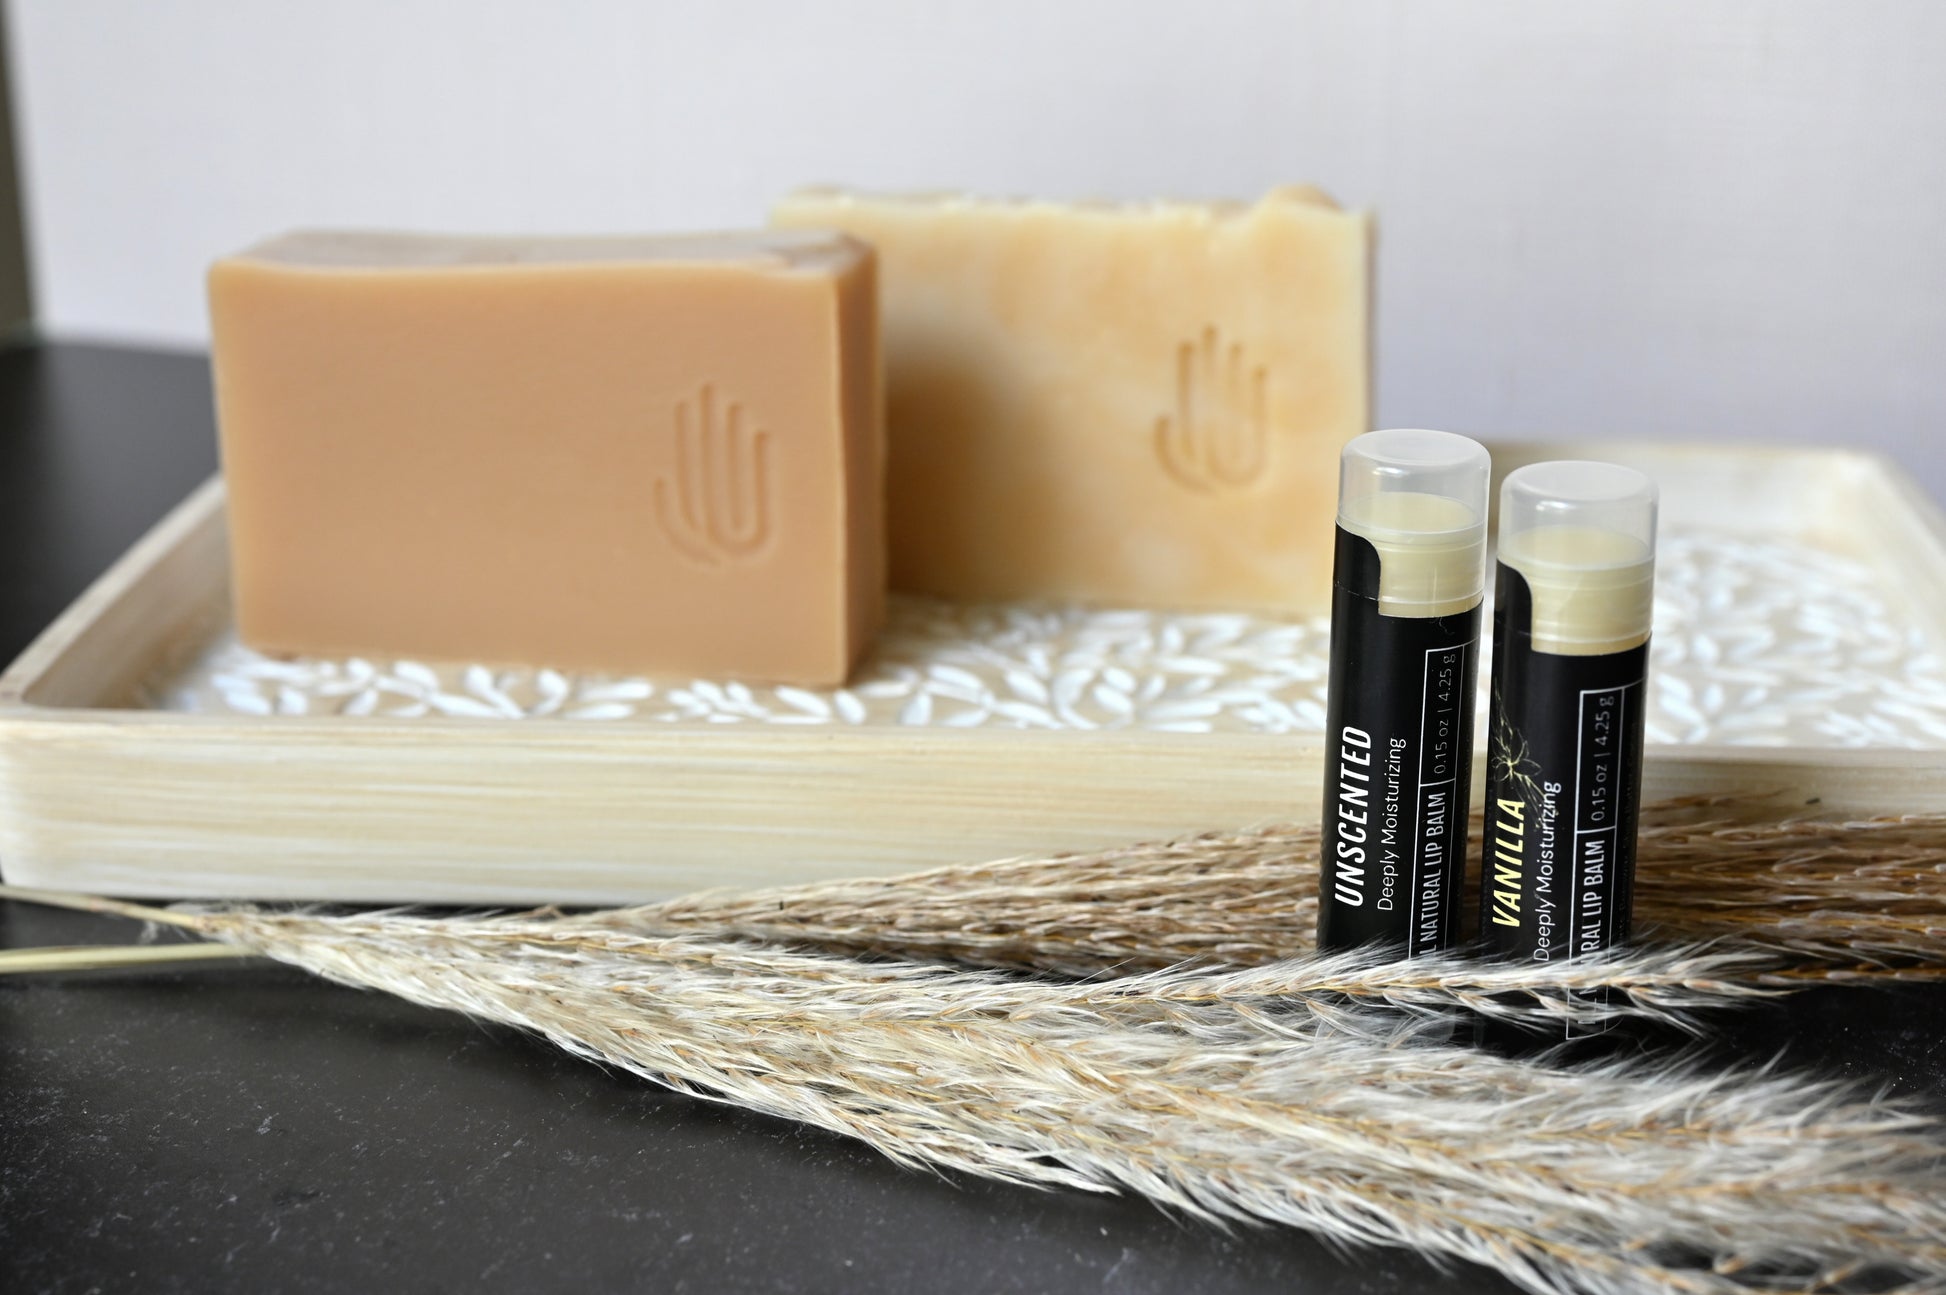 2 all natural lip balms with black labels sitting upright in dried decorative grass stalks in front of a decorative wooden tray with 2 tan soaps sitting on it